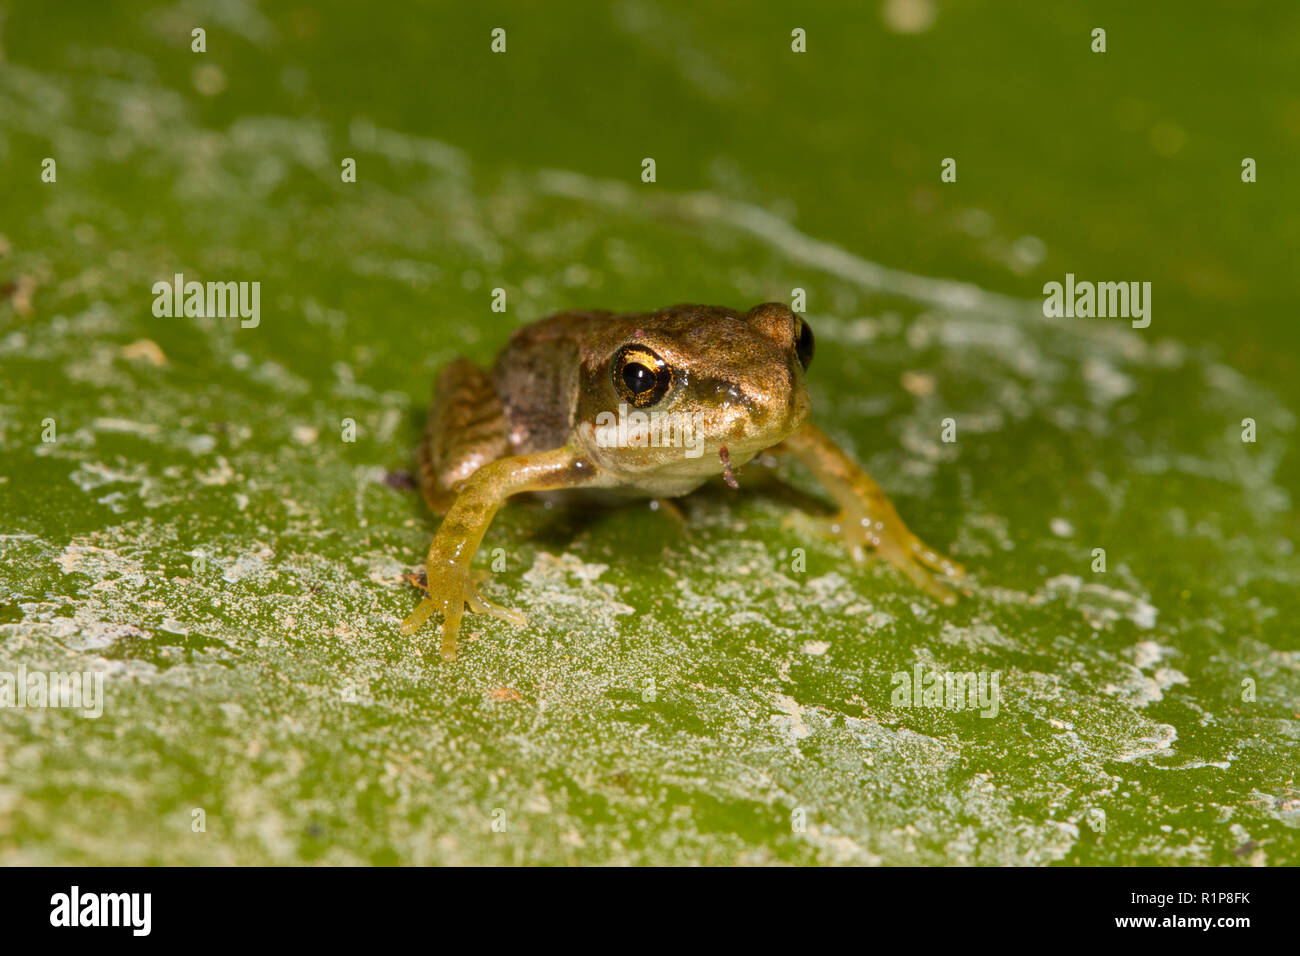 Common frog (Rana temporaria) froglet emerging from a pond. Powys, Wales. July. Stock Photo